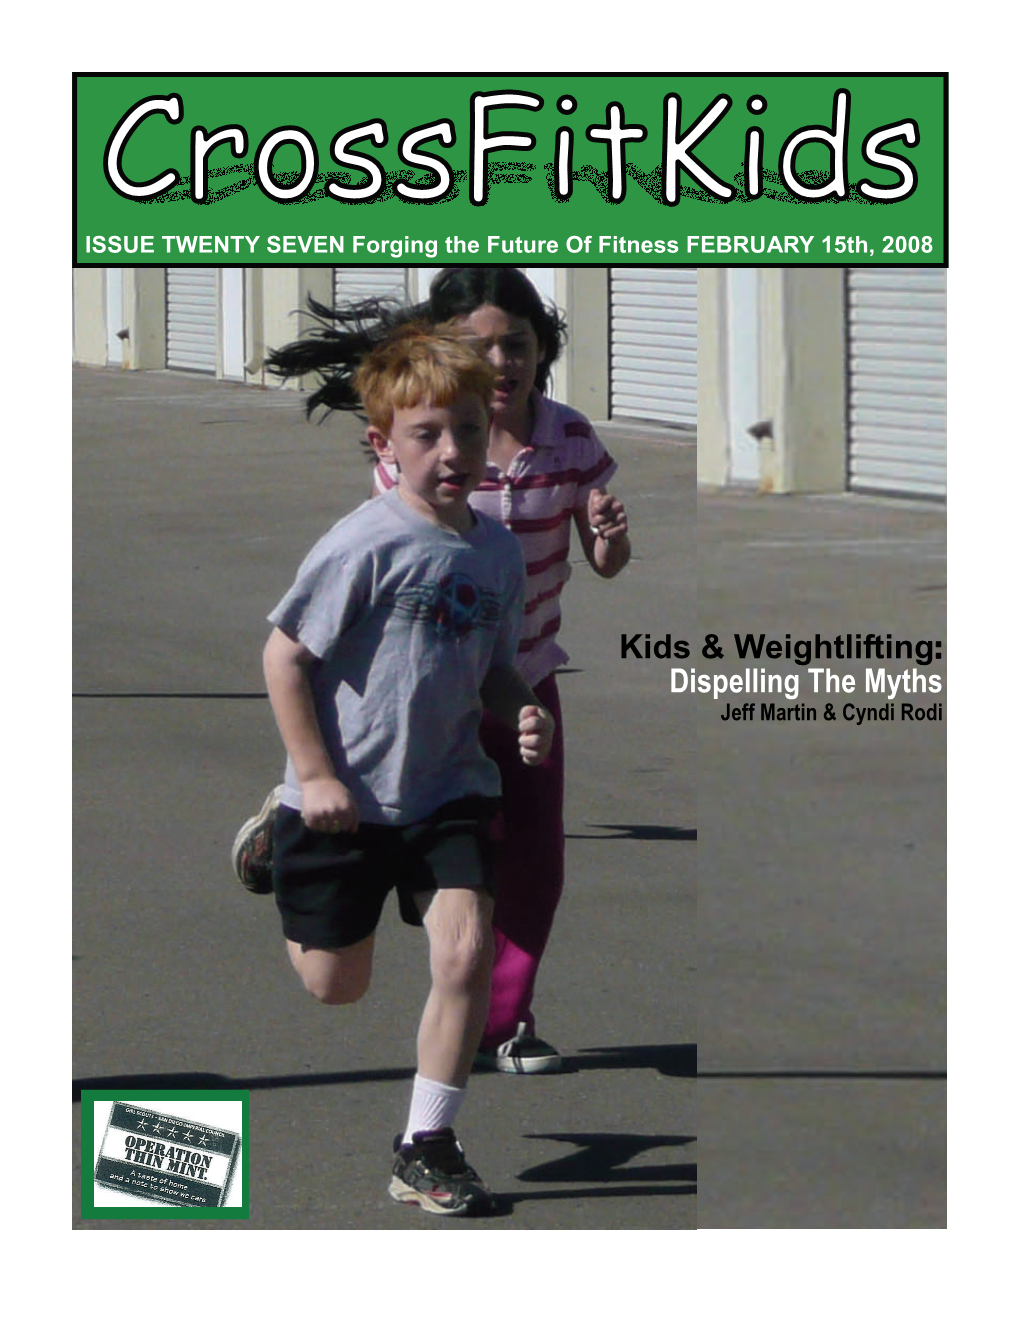 Kids & Weightlifting: Dispelling the Myths